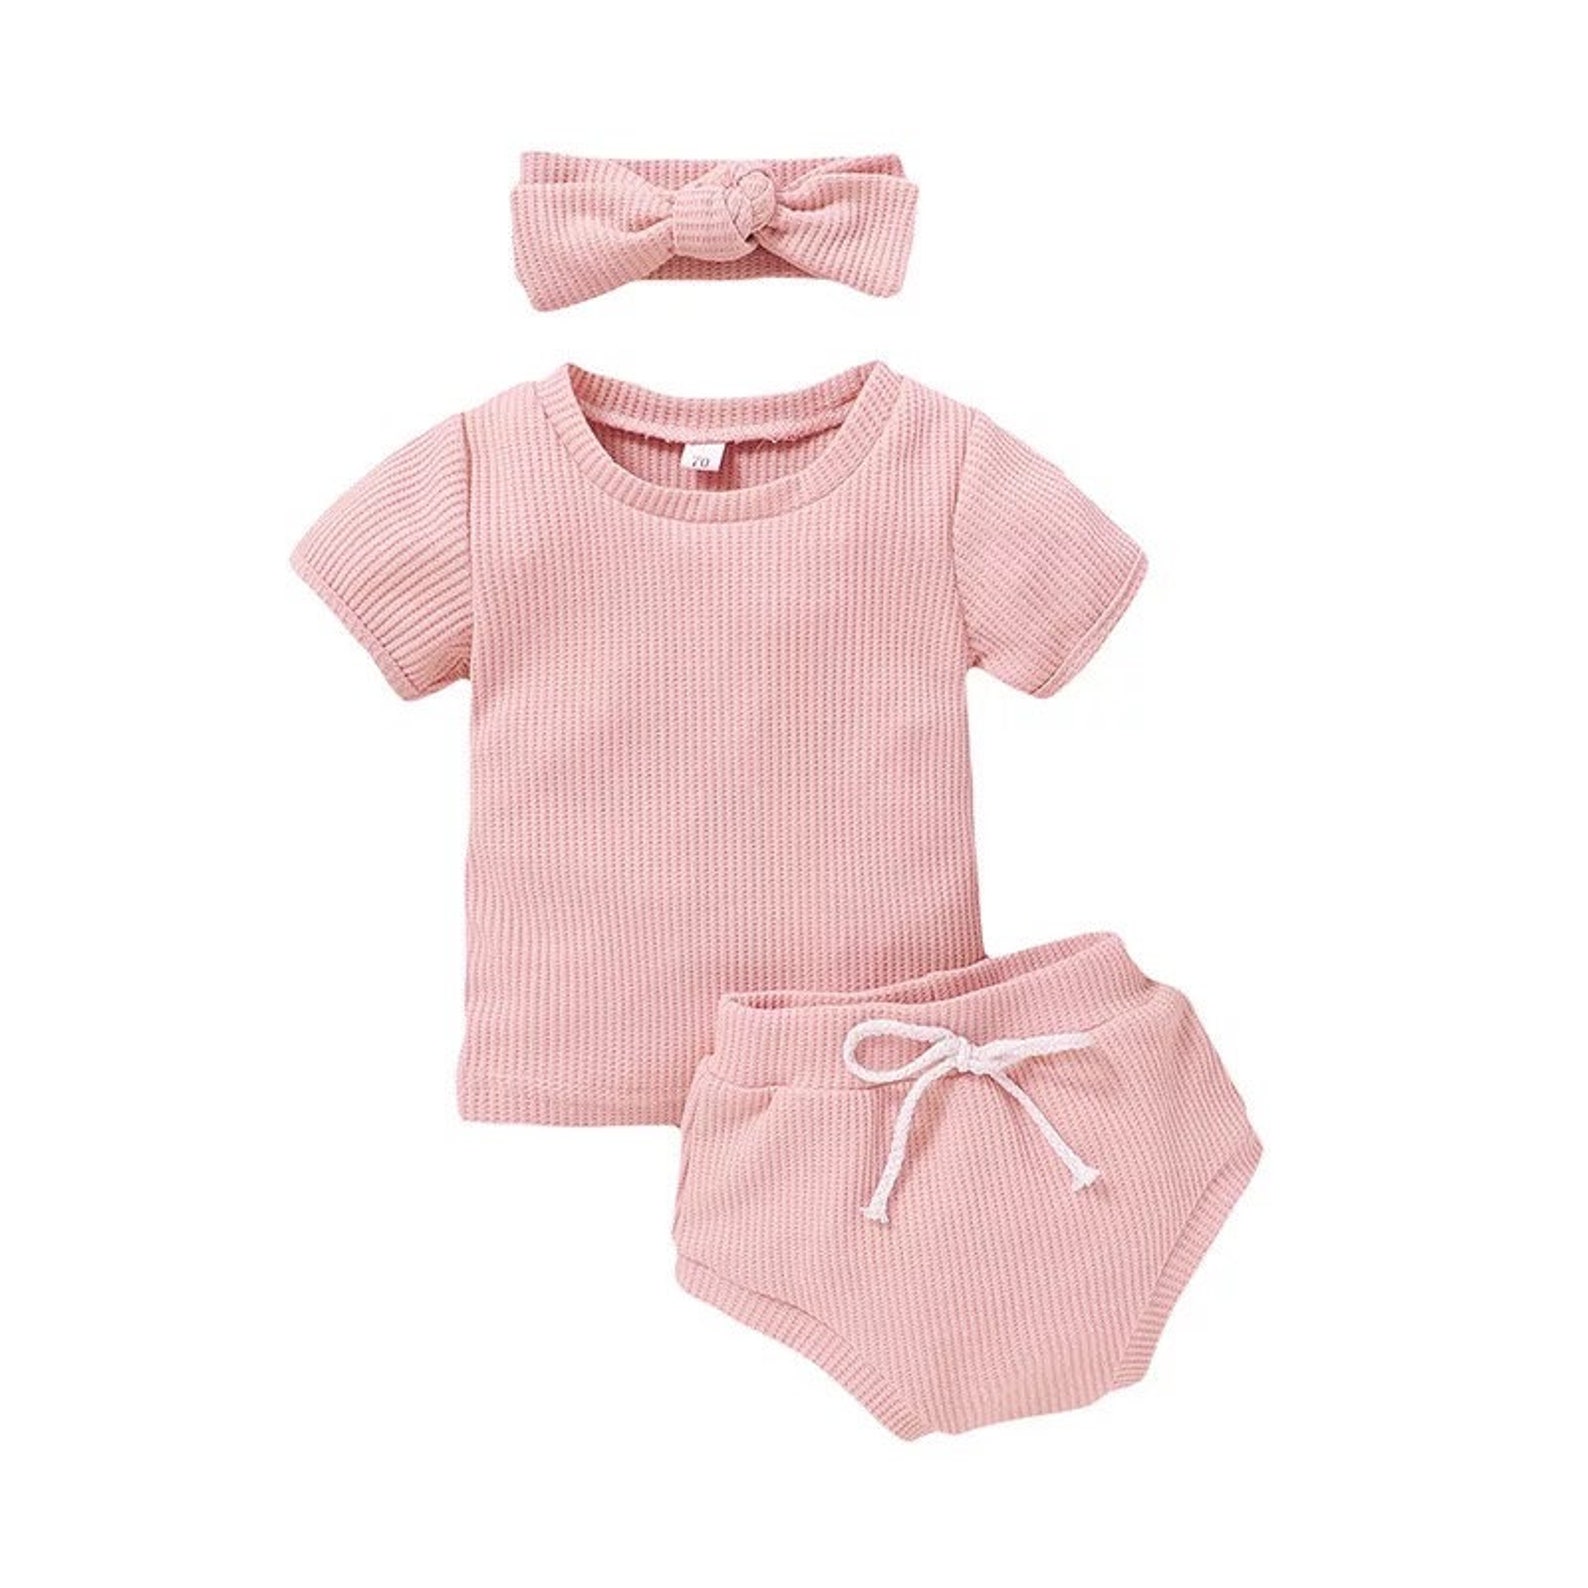 Baby Girl Cotton Ribbed 3-piece Outfit Spring Baby Clothes | Etsy